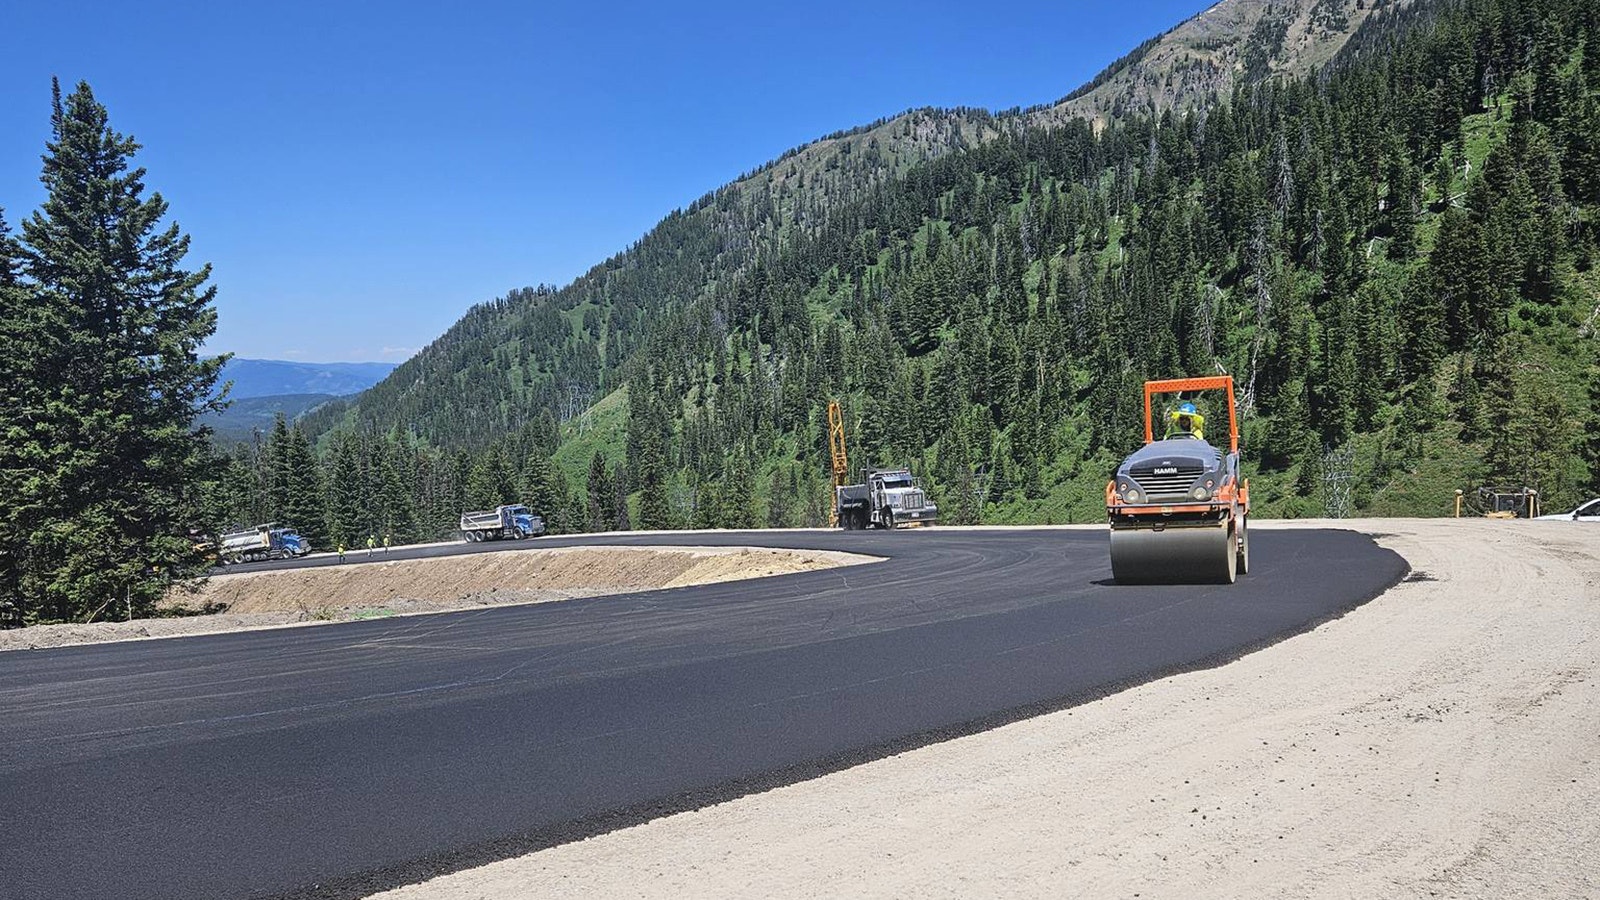 Paving on a workaround to a catastrophic failure of a section of Highway 22 over Teton Pass began Tuesday, less than three weeks after the slide.